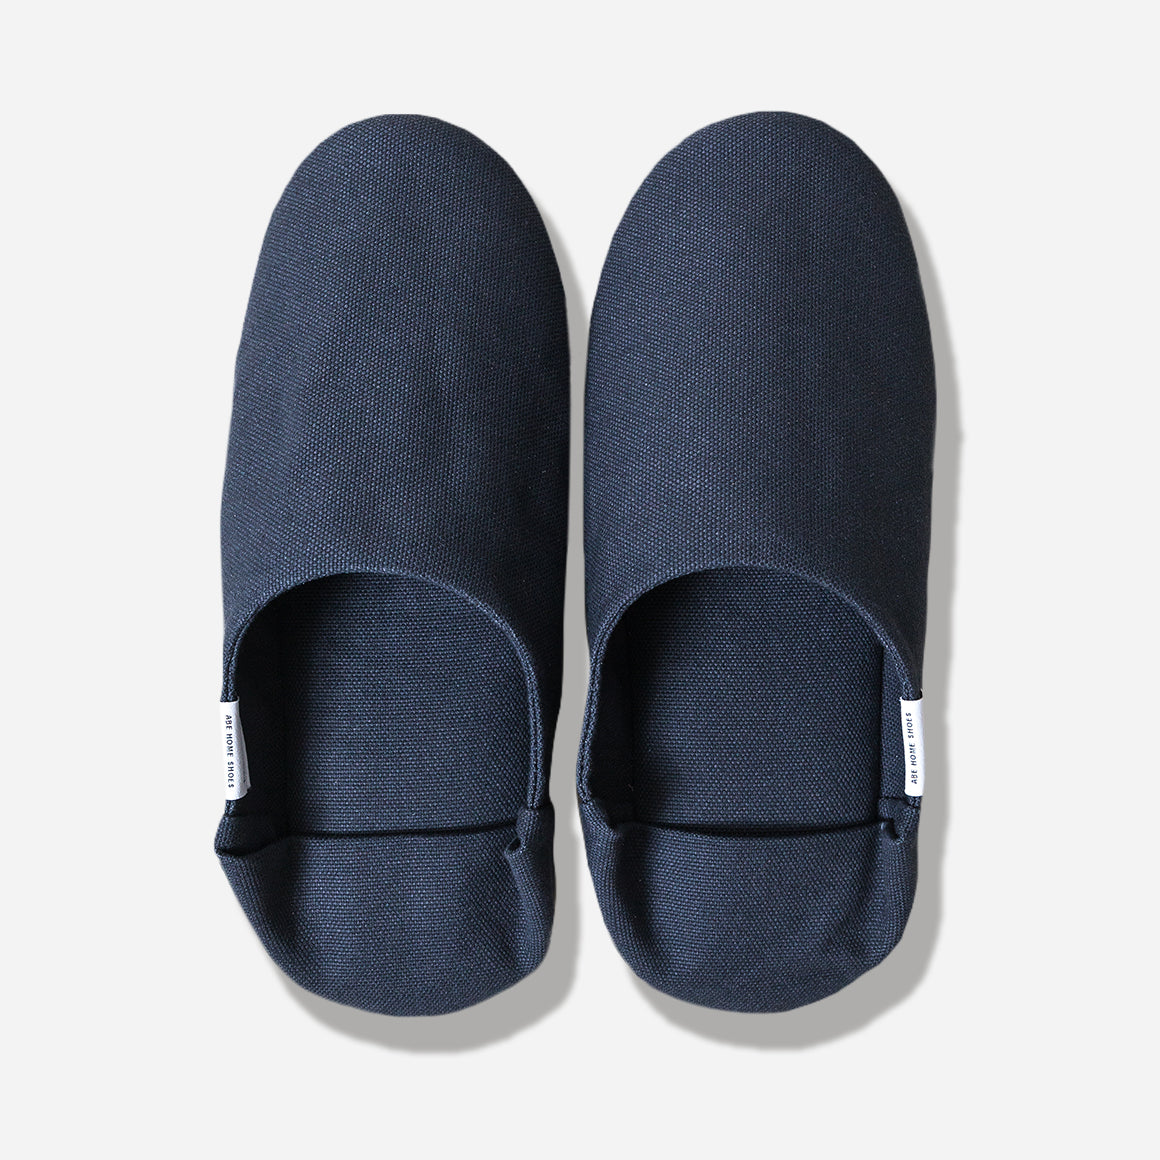 Top-down view of navy slippers with heel flap folded down. Shot against a white background.